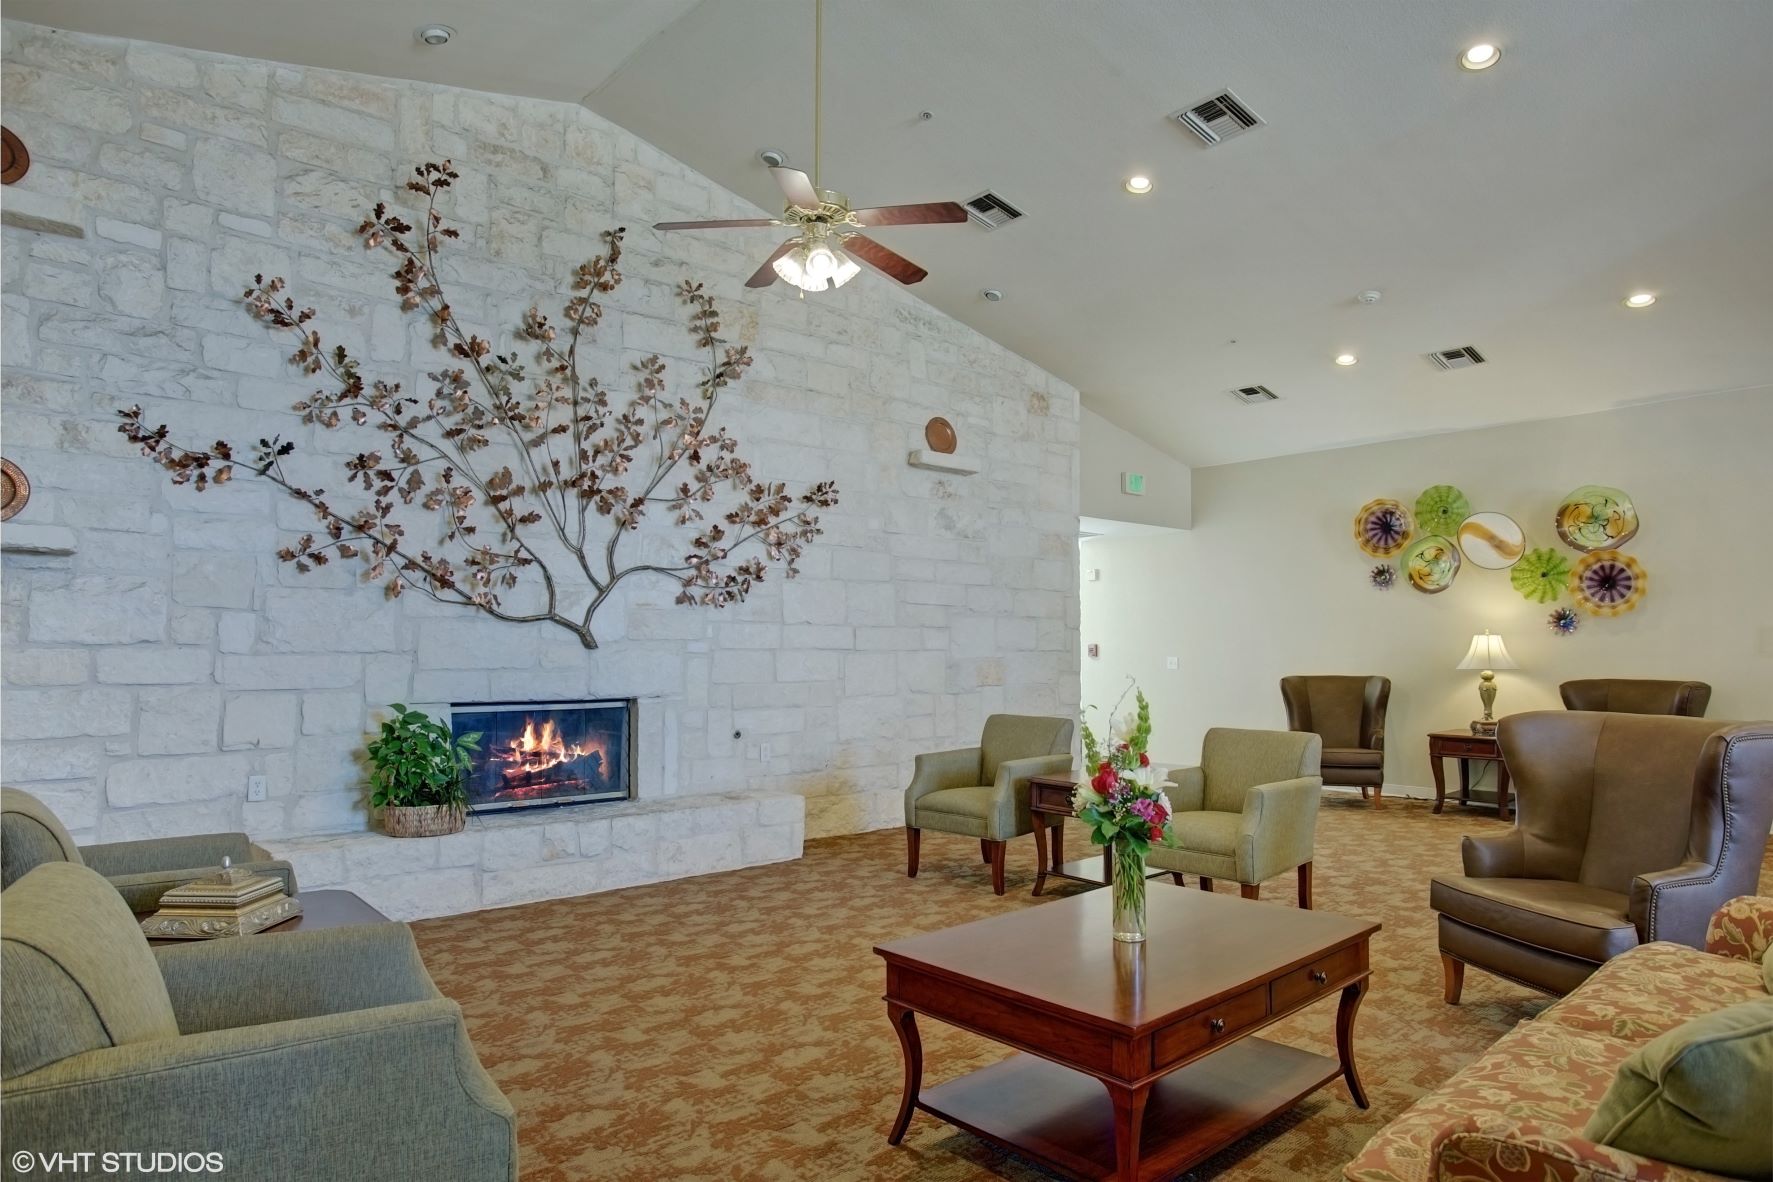 Gateway Villas and Gateway Gardens boasts a spacious common area for our seniors!